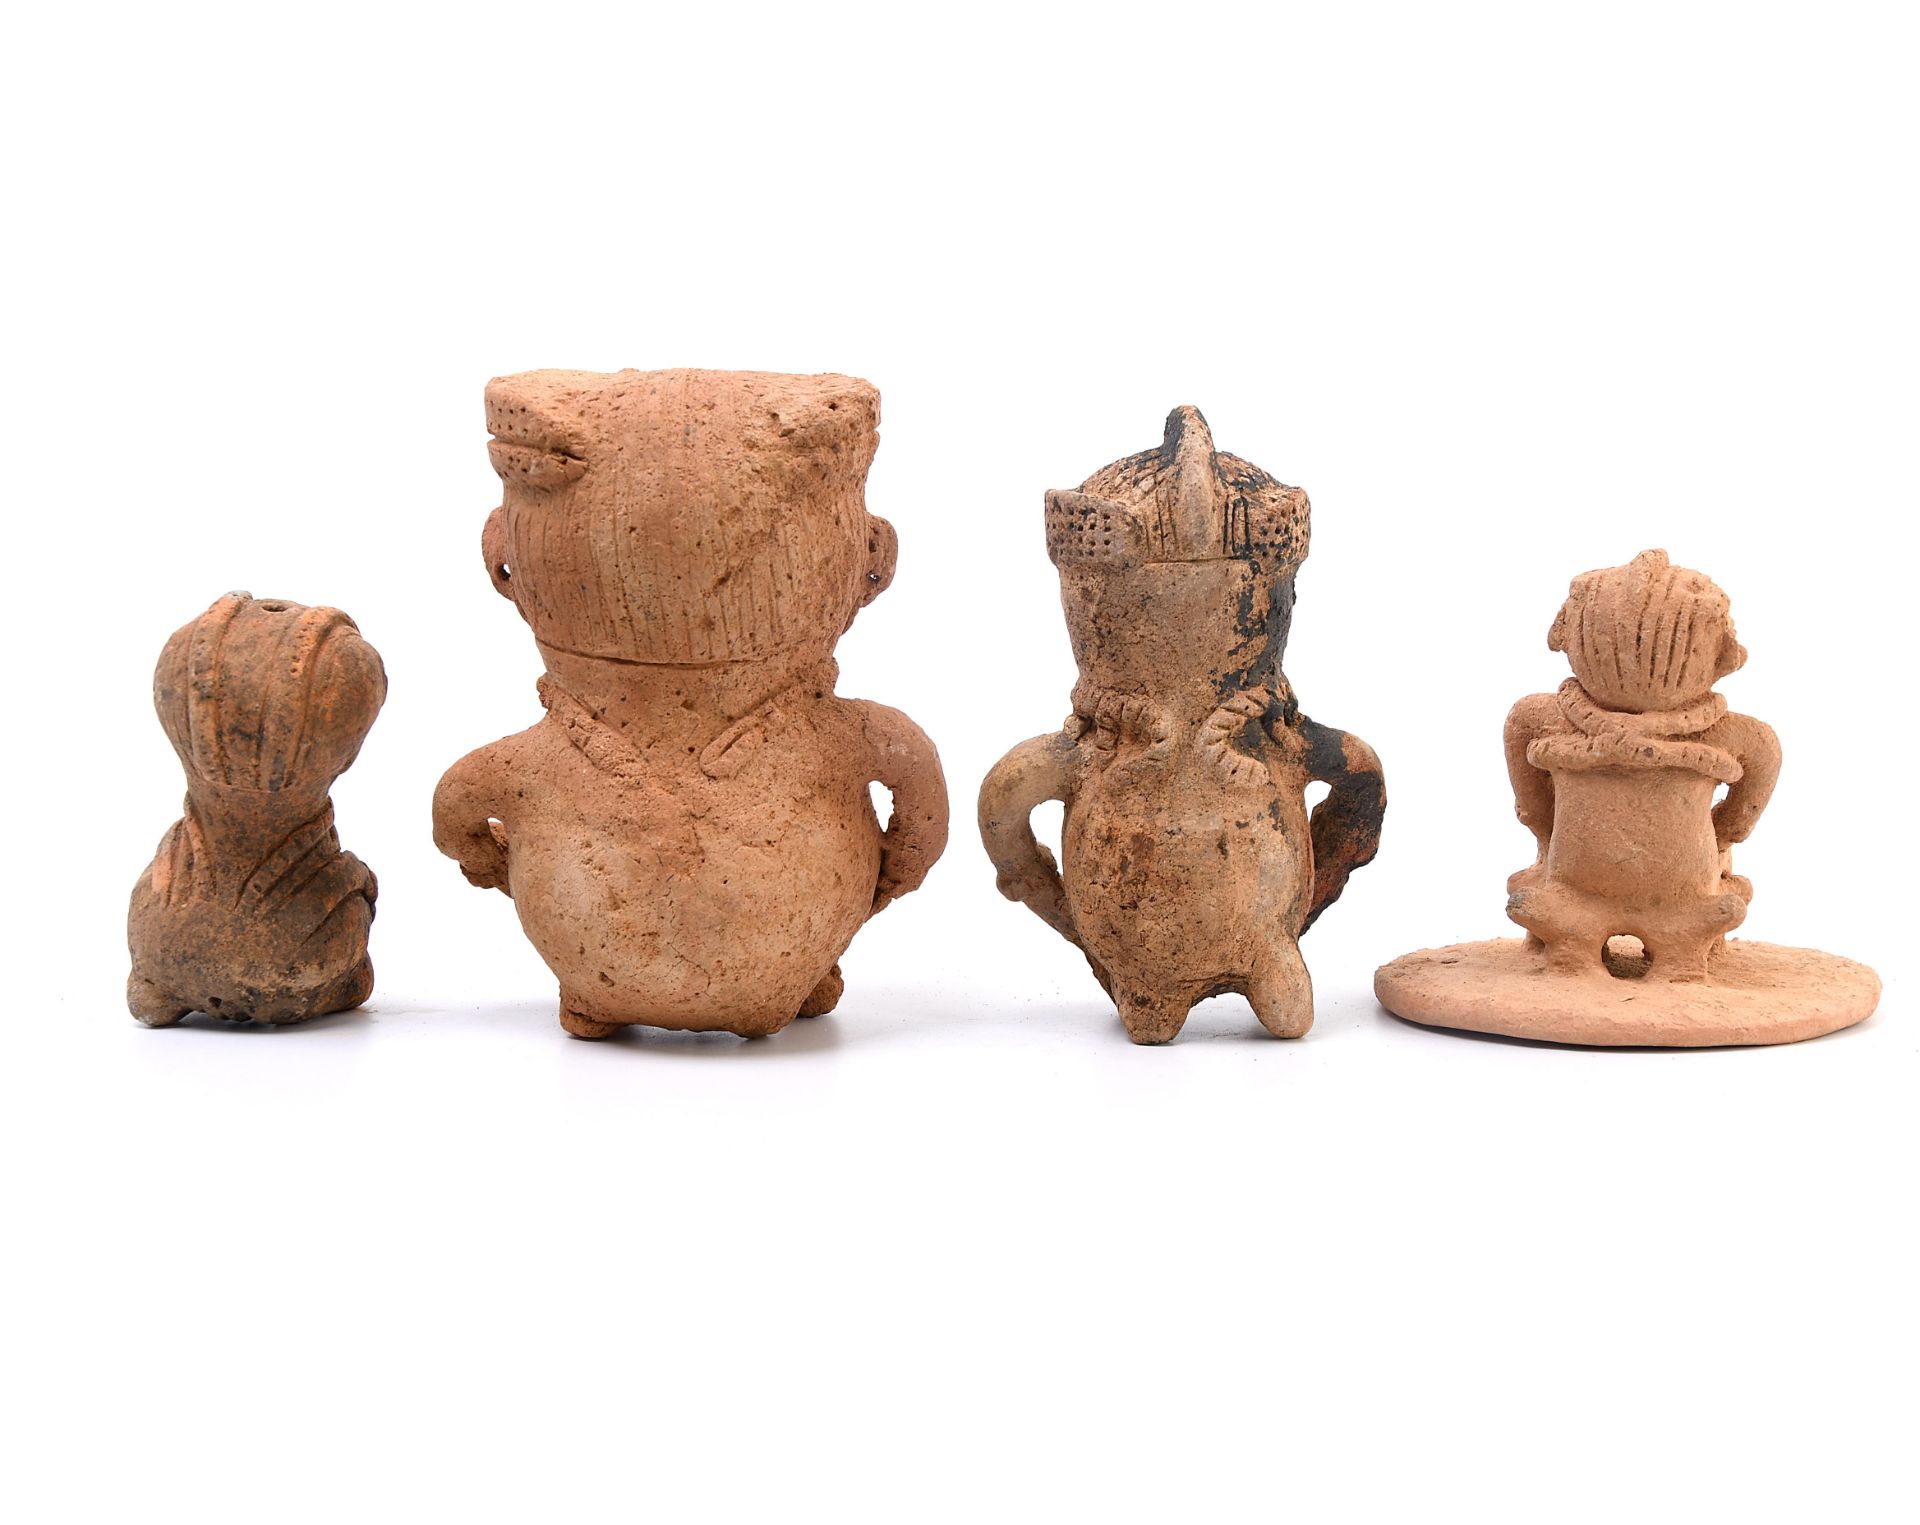 Colombia, Sinu region, four terracotta figures, ca. 1200-1400 AD. - Image 4 of 4